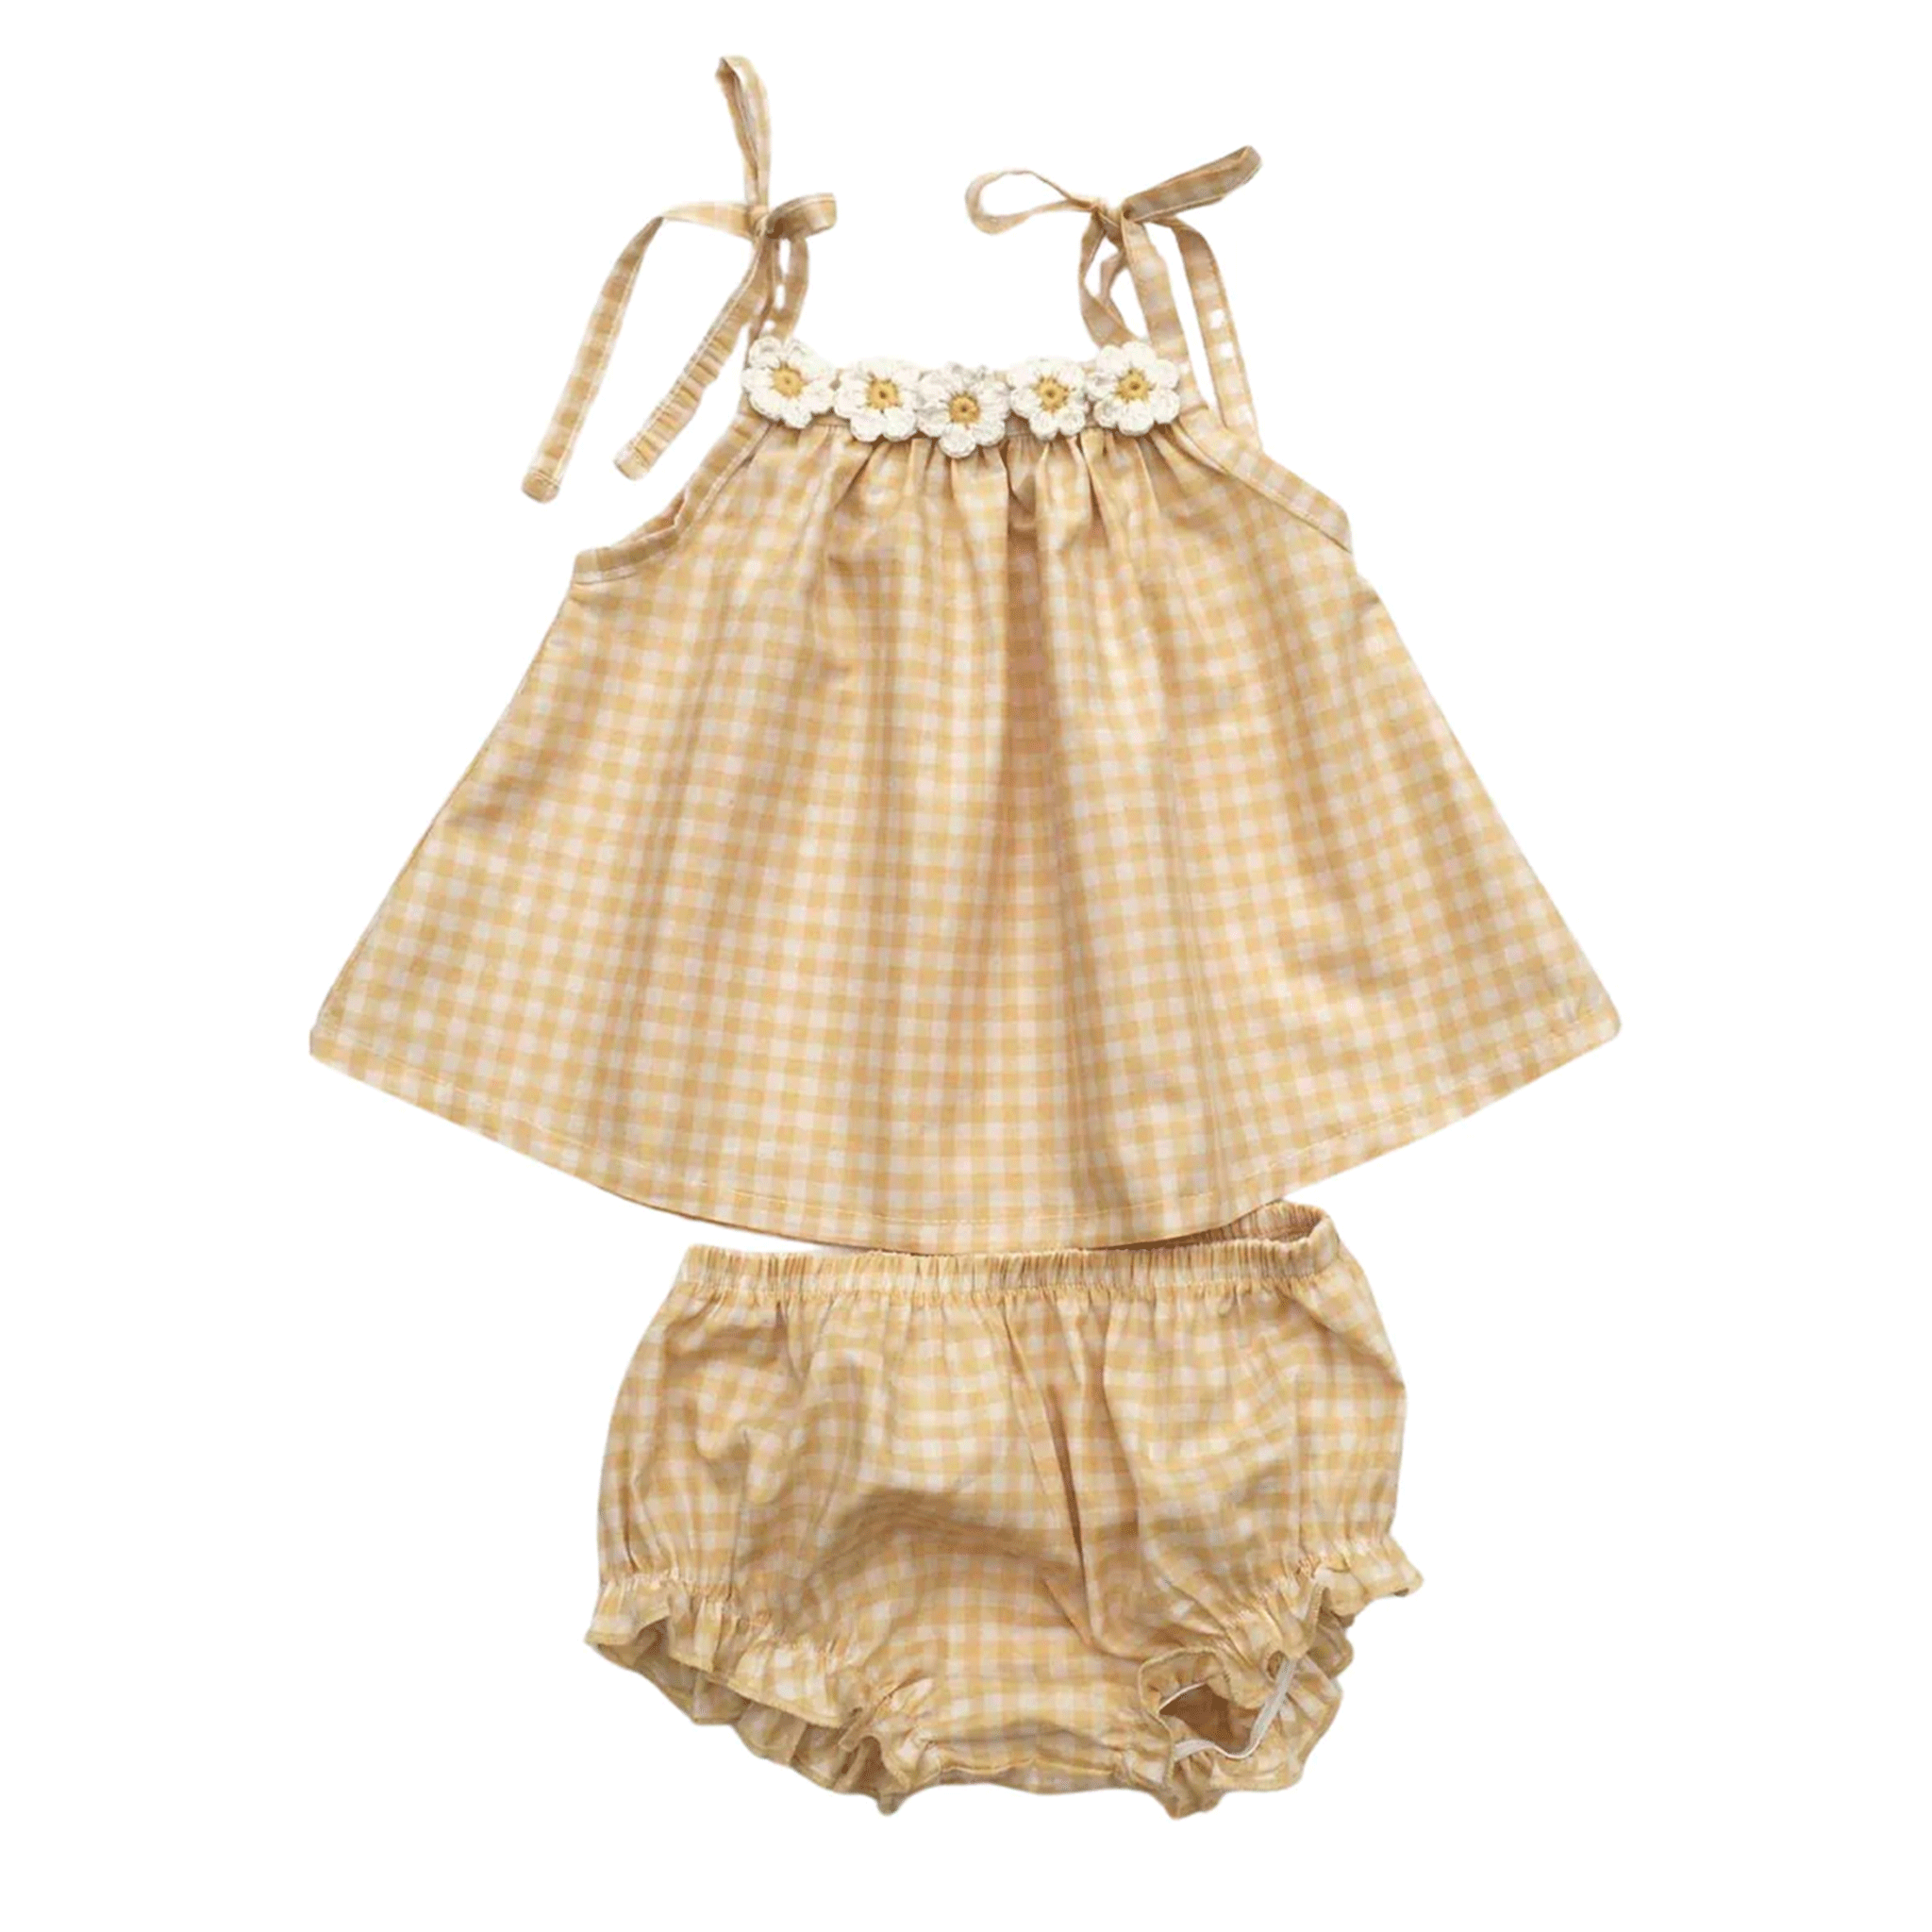 On a white background is a tan gingham set with bloomers and a flowy top with tie details and a daisy neckline. 